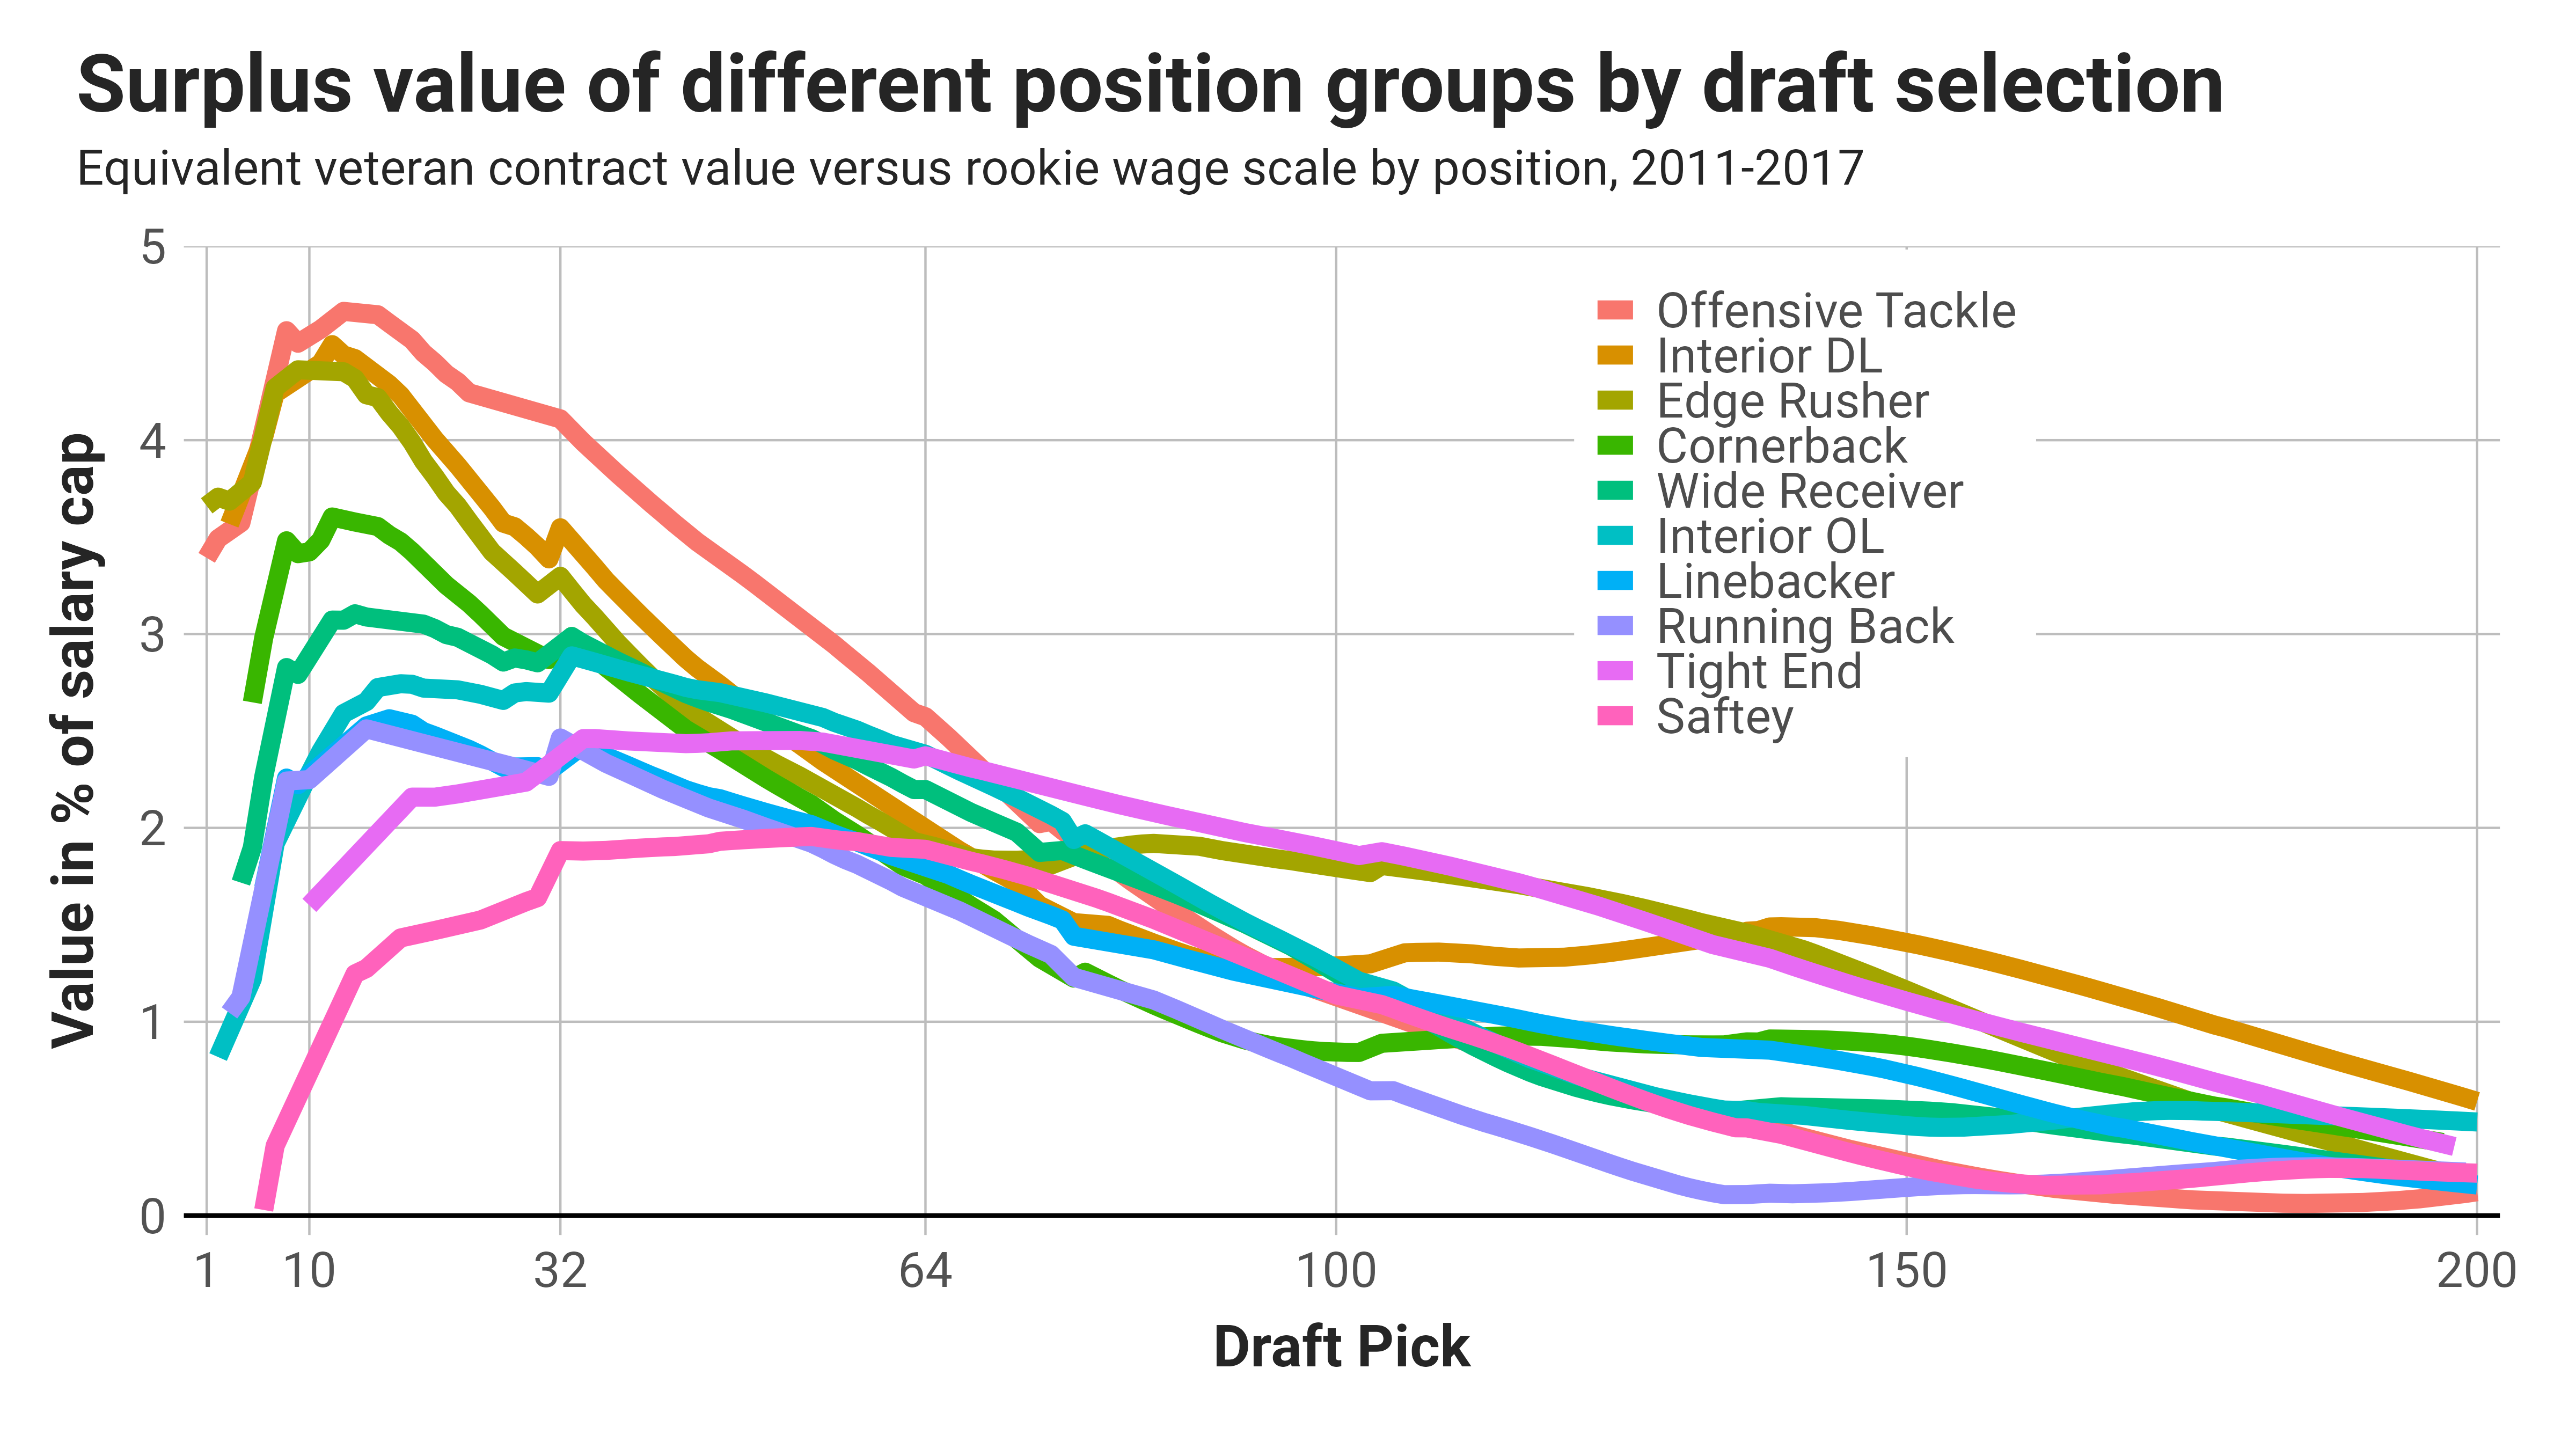 Chart showing the surplus value of different position groups by draft selection